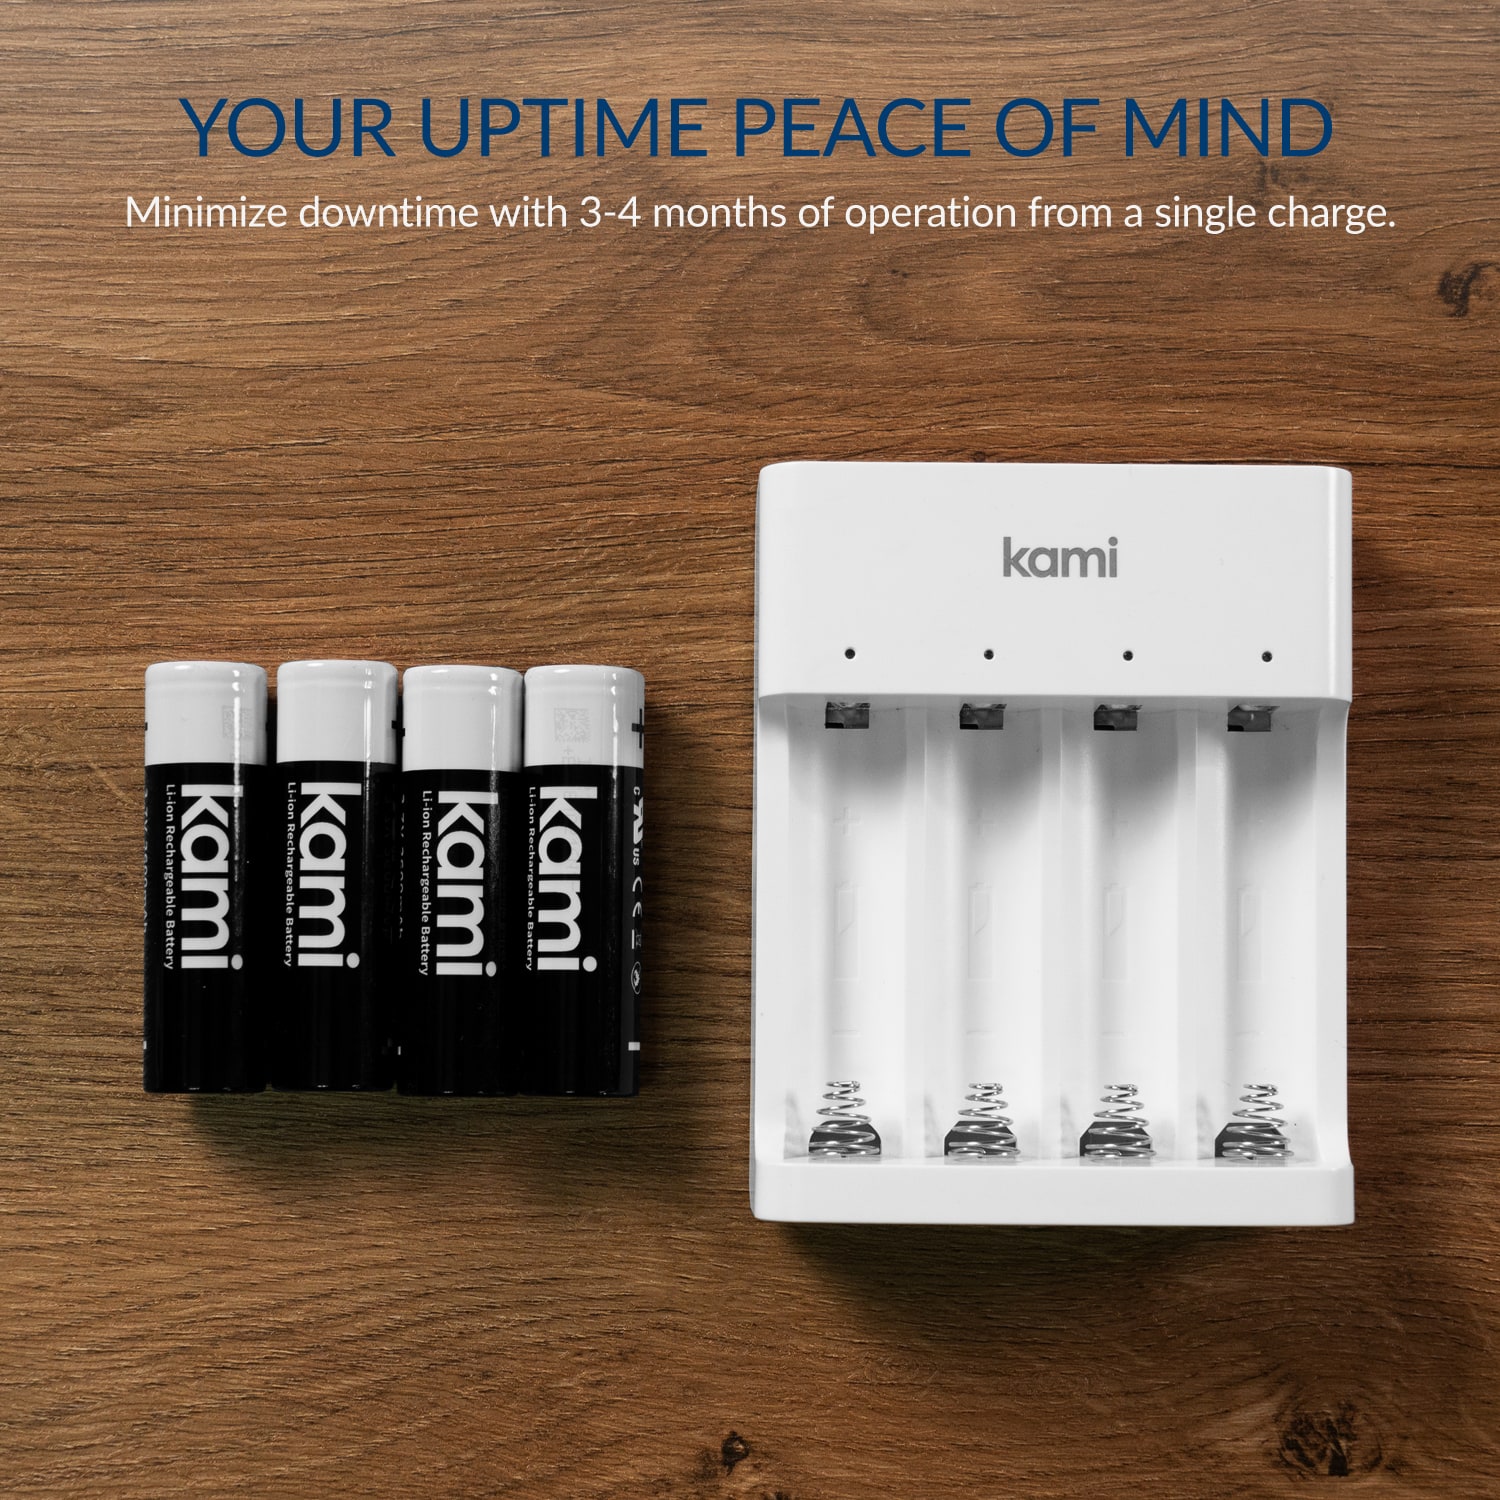 Your Uptime Peace of Mind - Minimise downtime with 3 - 4 months of operation from a single charge